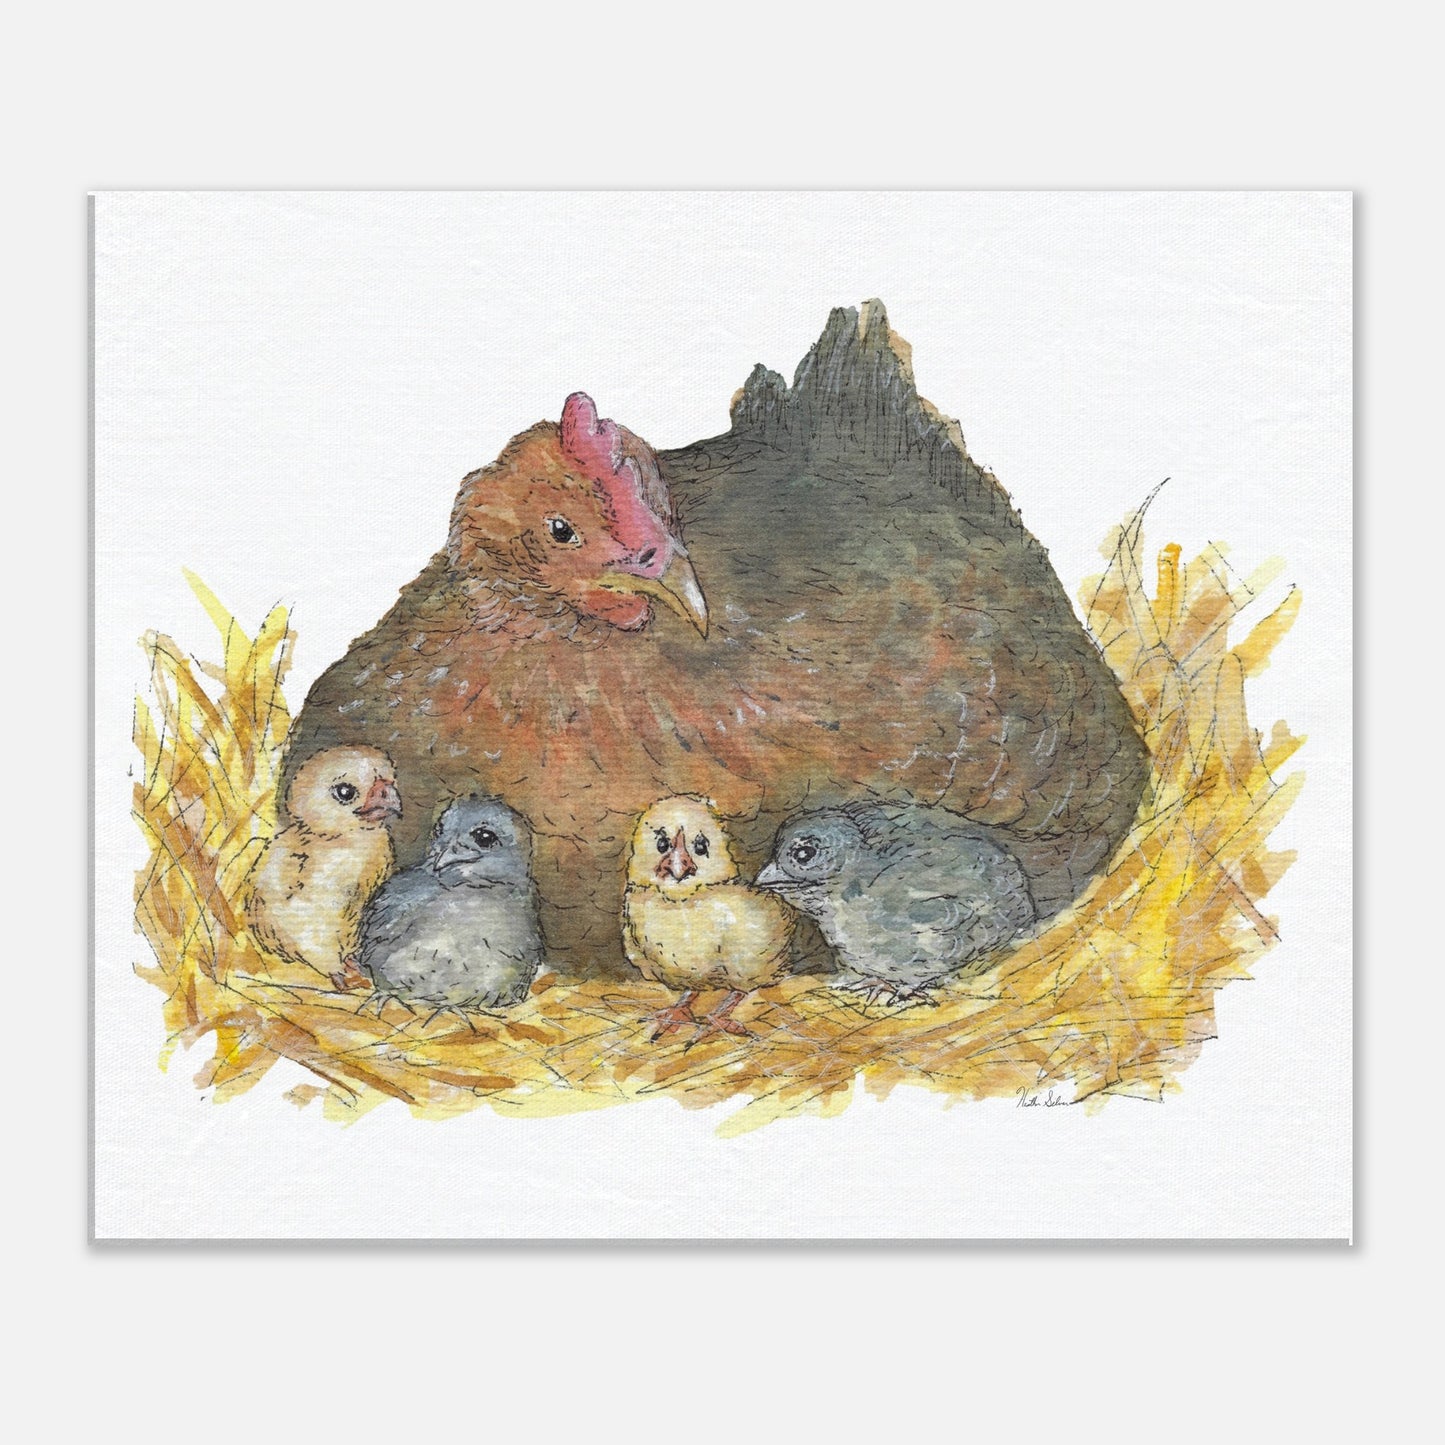 11 by 14 inch slim canvas Mother Hen print. Features a watercolor mother hen and her four chicks in a nest.